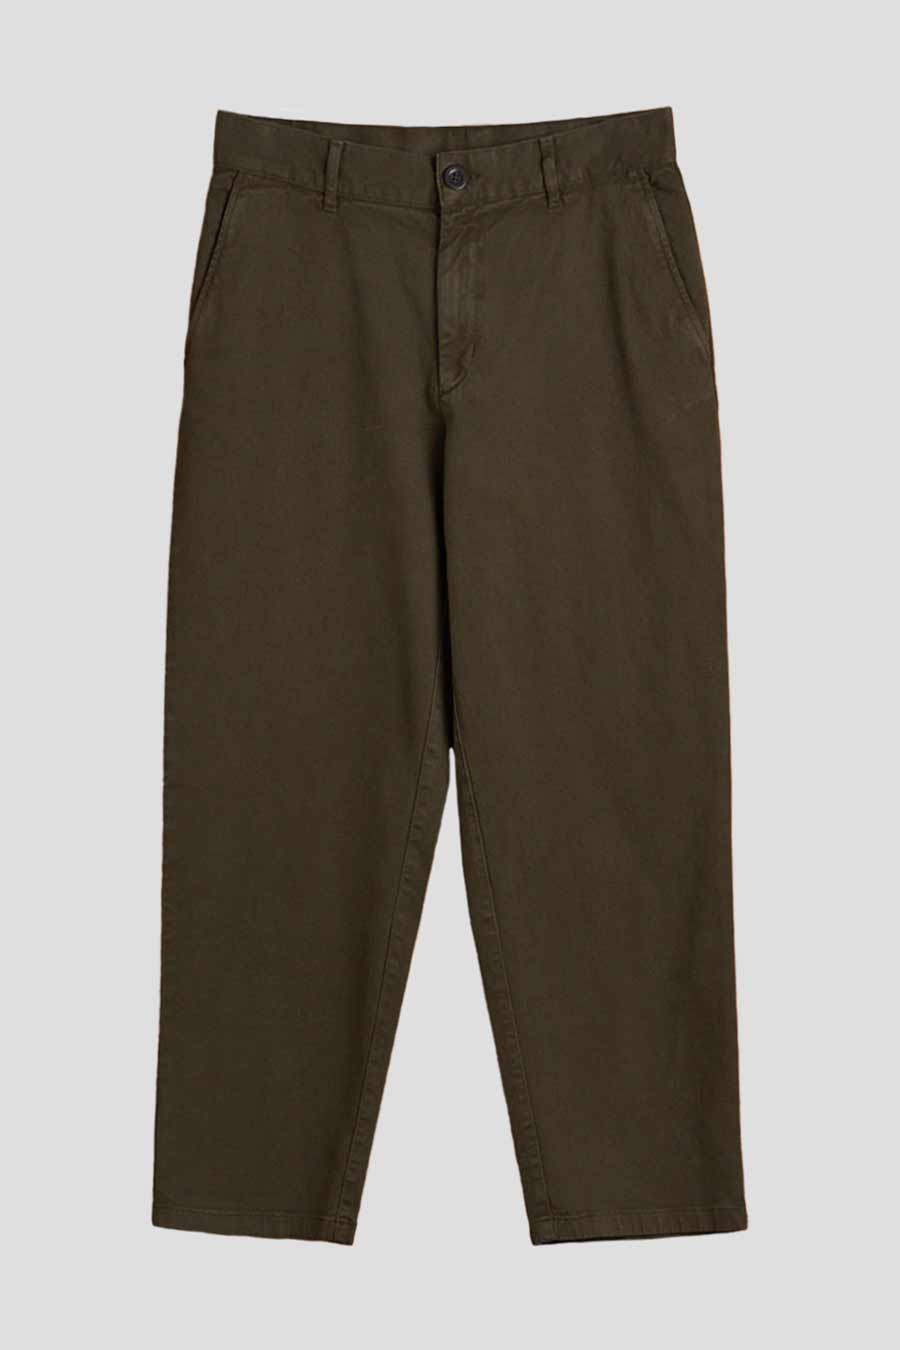 Twill Cotton Trousers